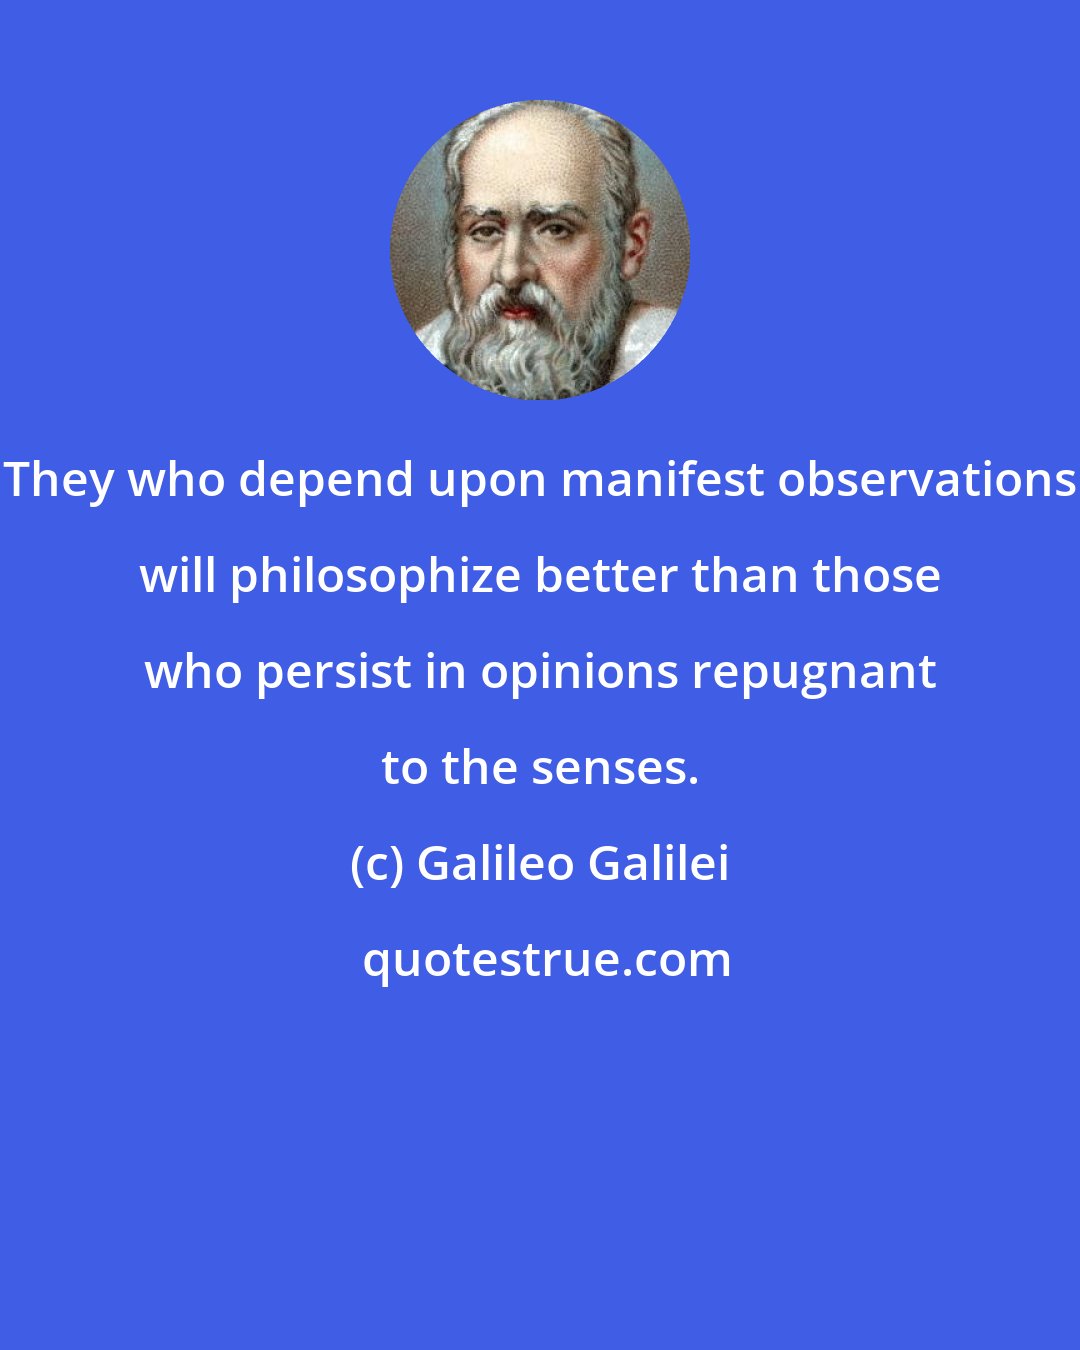 Galileo Galilei: They who depend upon manifest observations will philosophize better than those who persist in opinions repugnant to the senses.